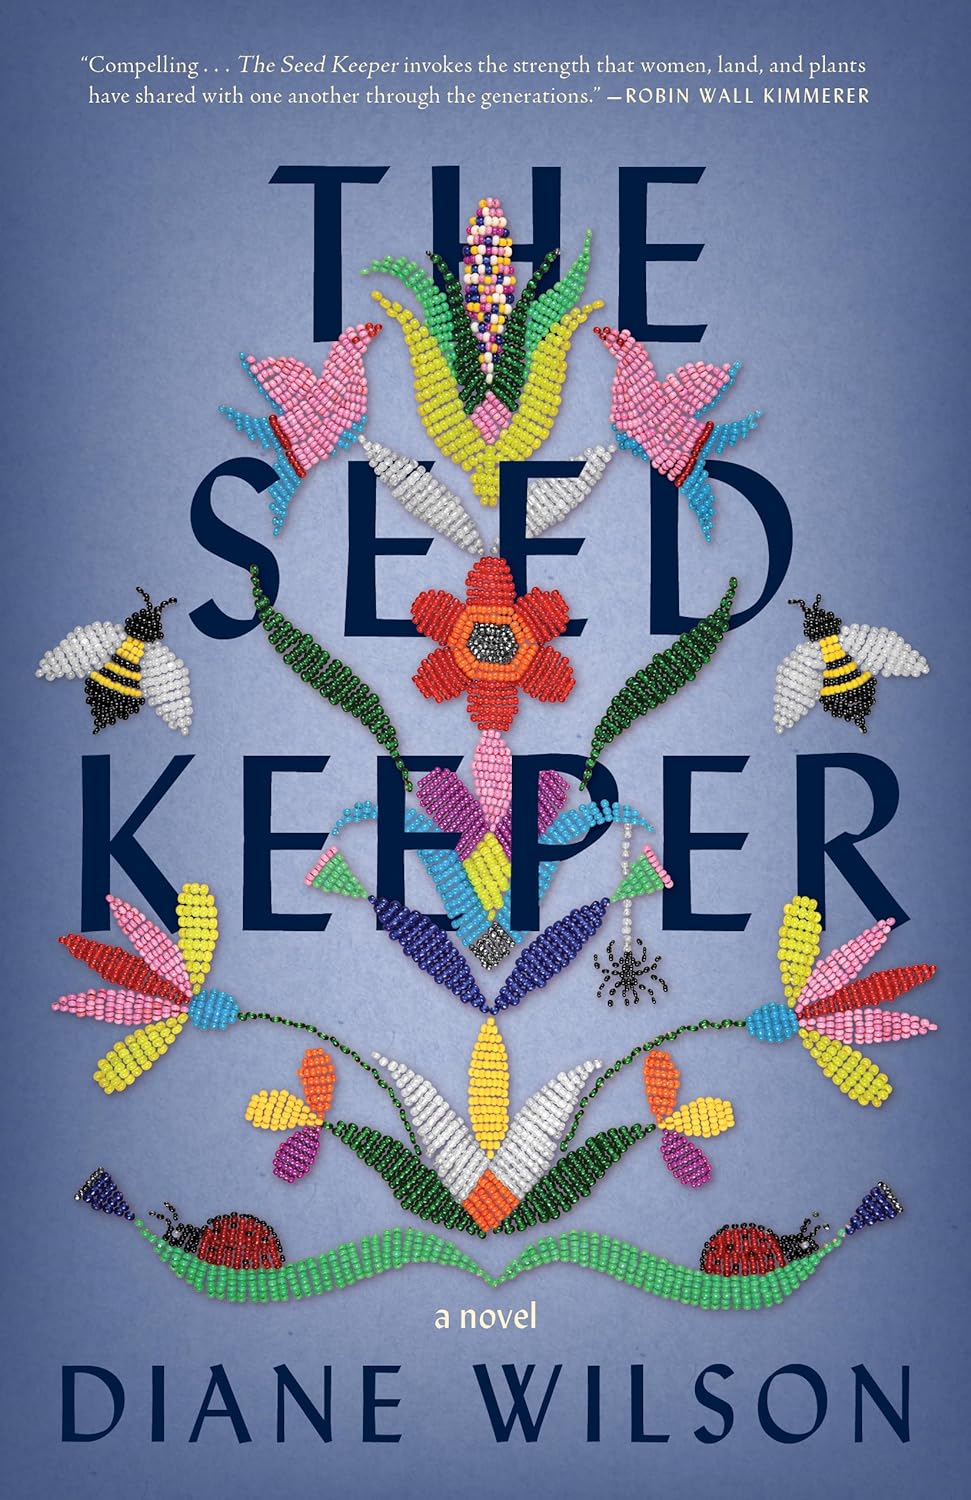 the seed keepers